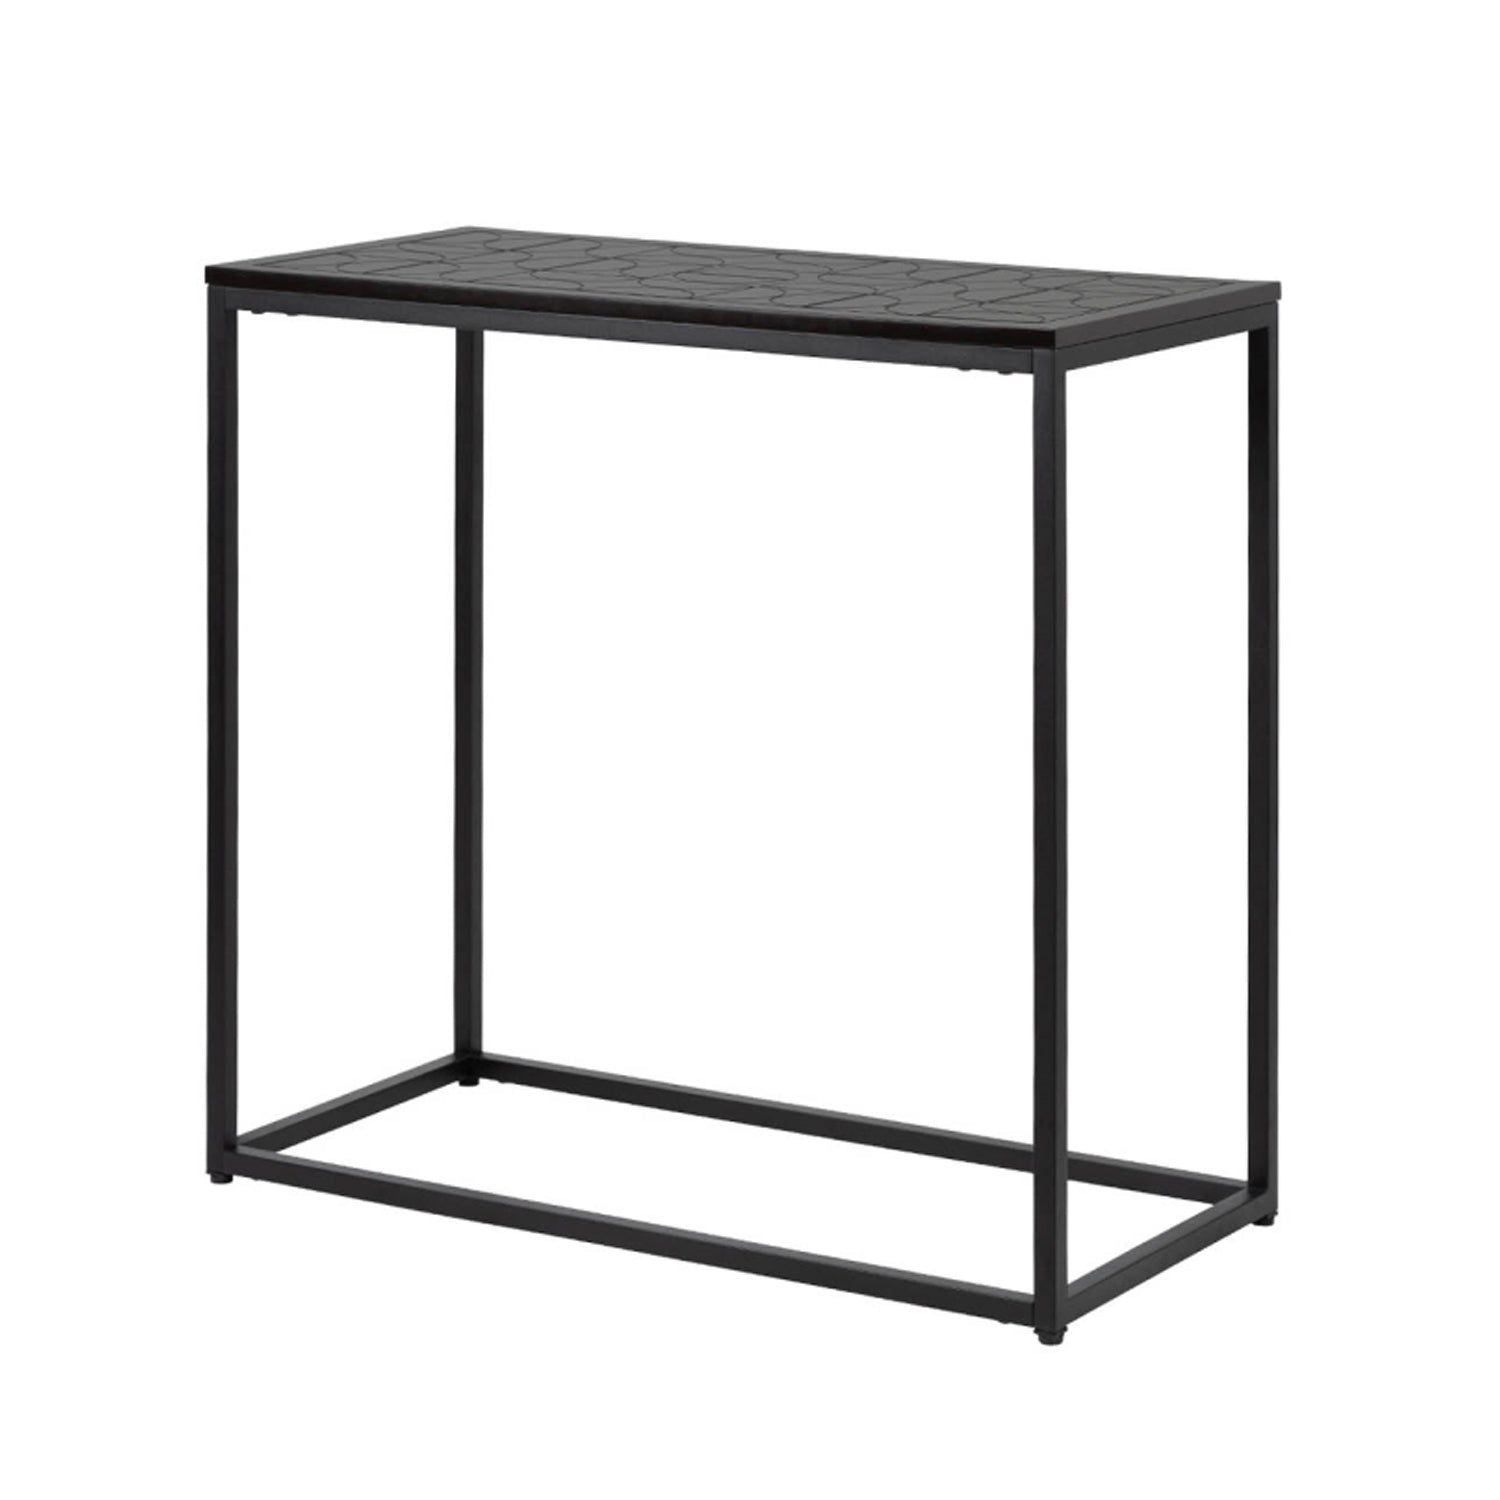 Black Stainless Steel Console Table